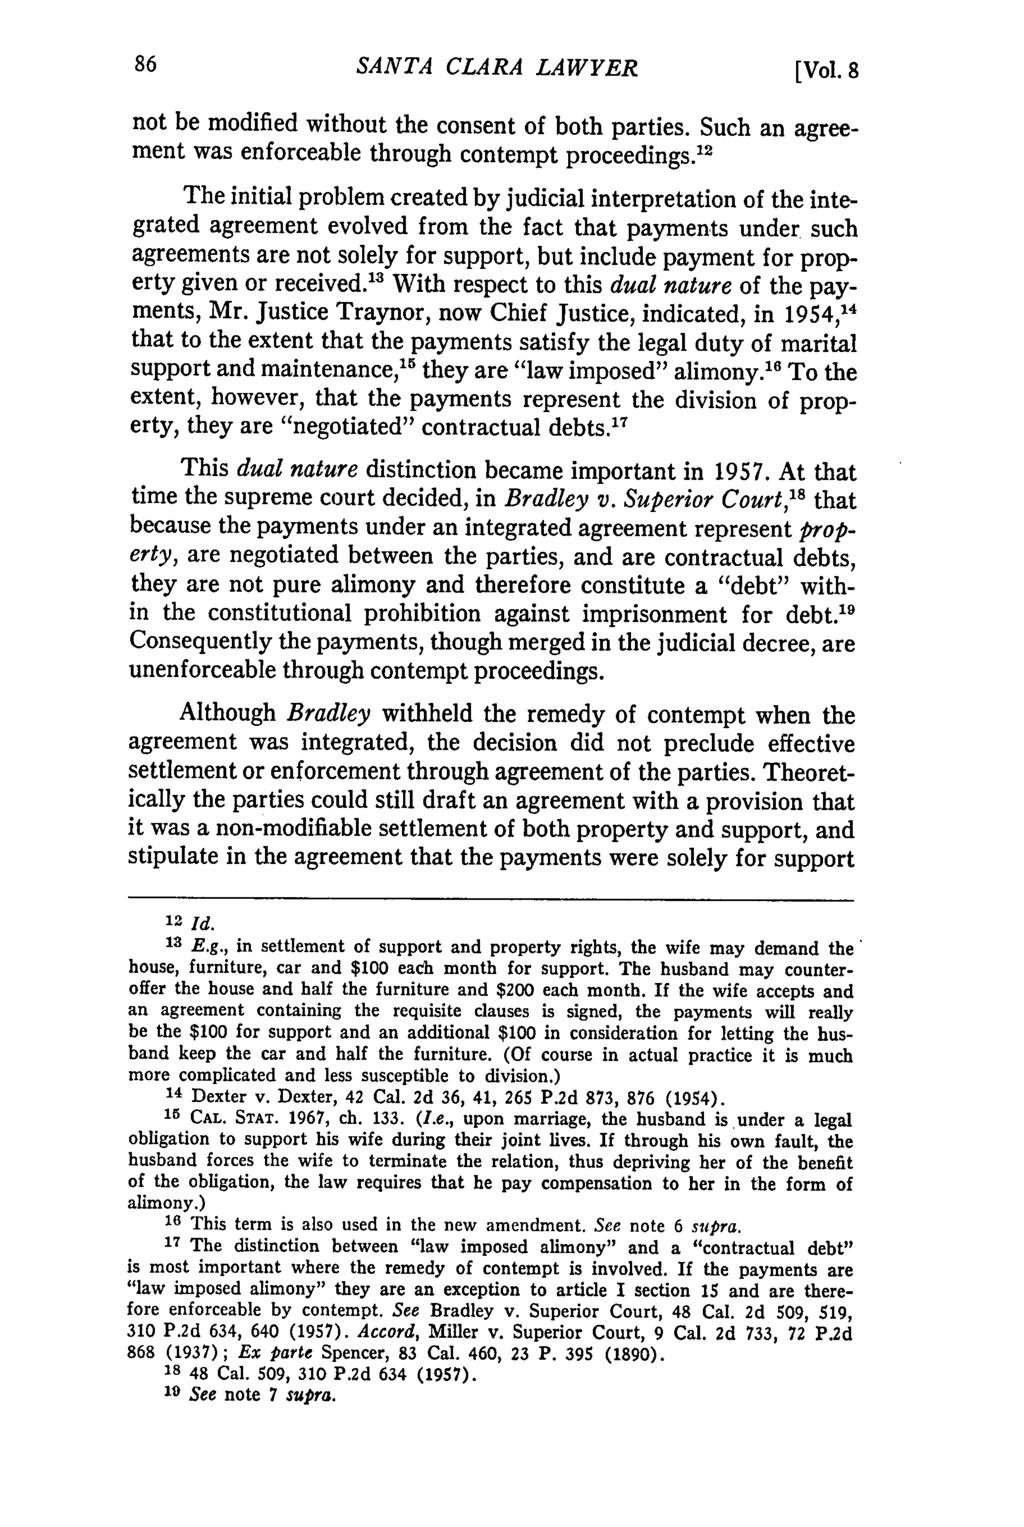 SANTA CLARA LAWYER [Vol. 8 not be modified without the consent of both parties. Such an agreement was enforceable through contempt proceedings.